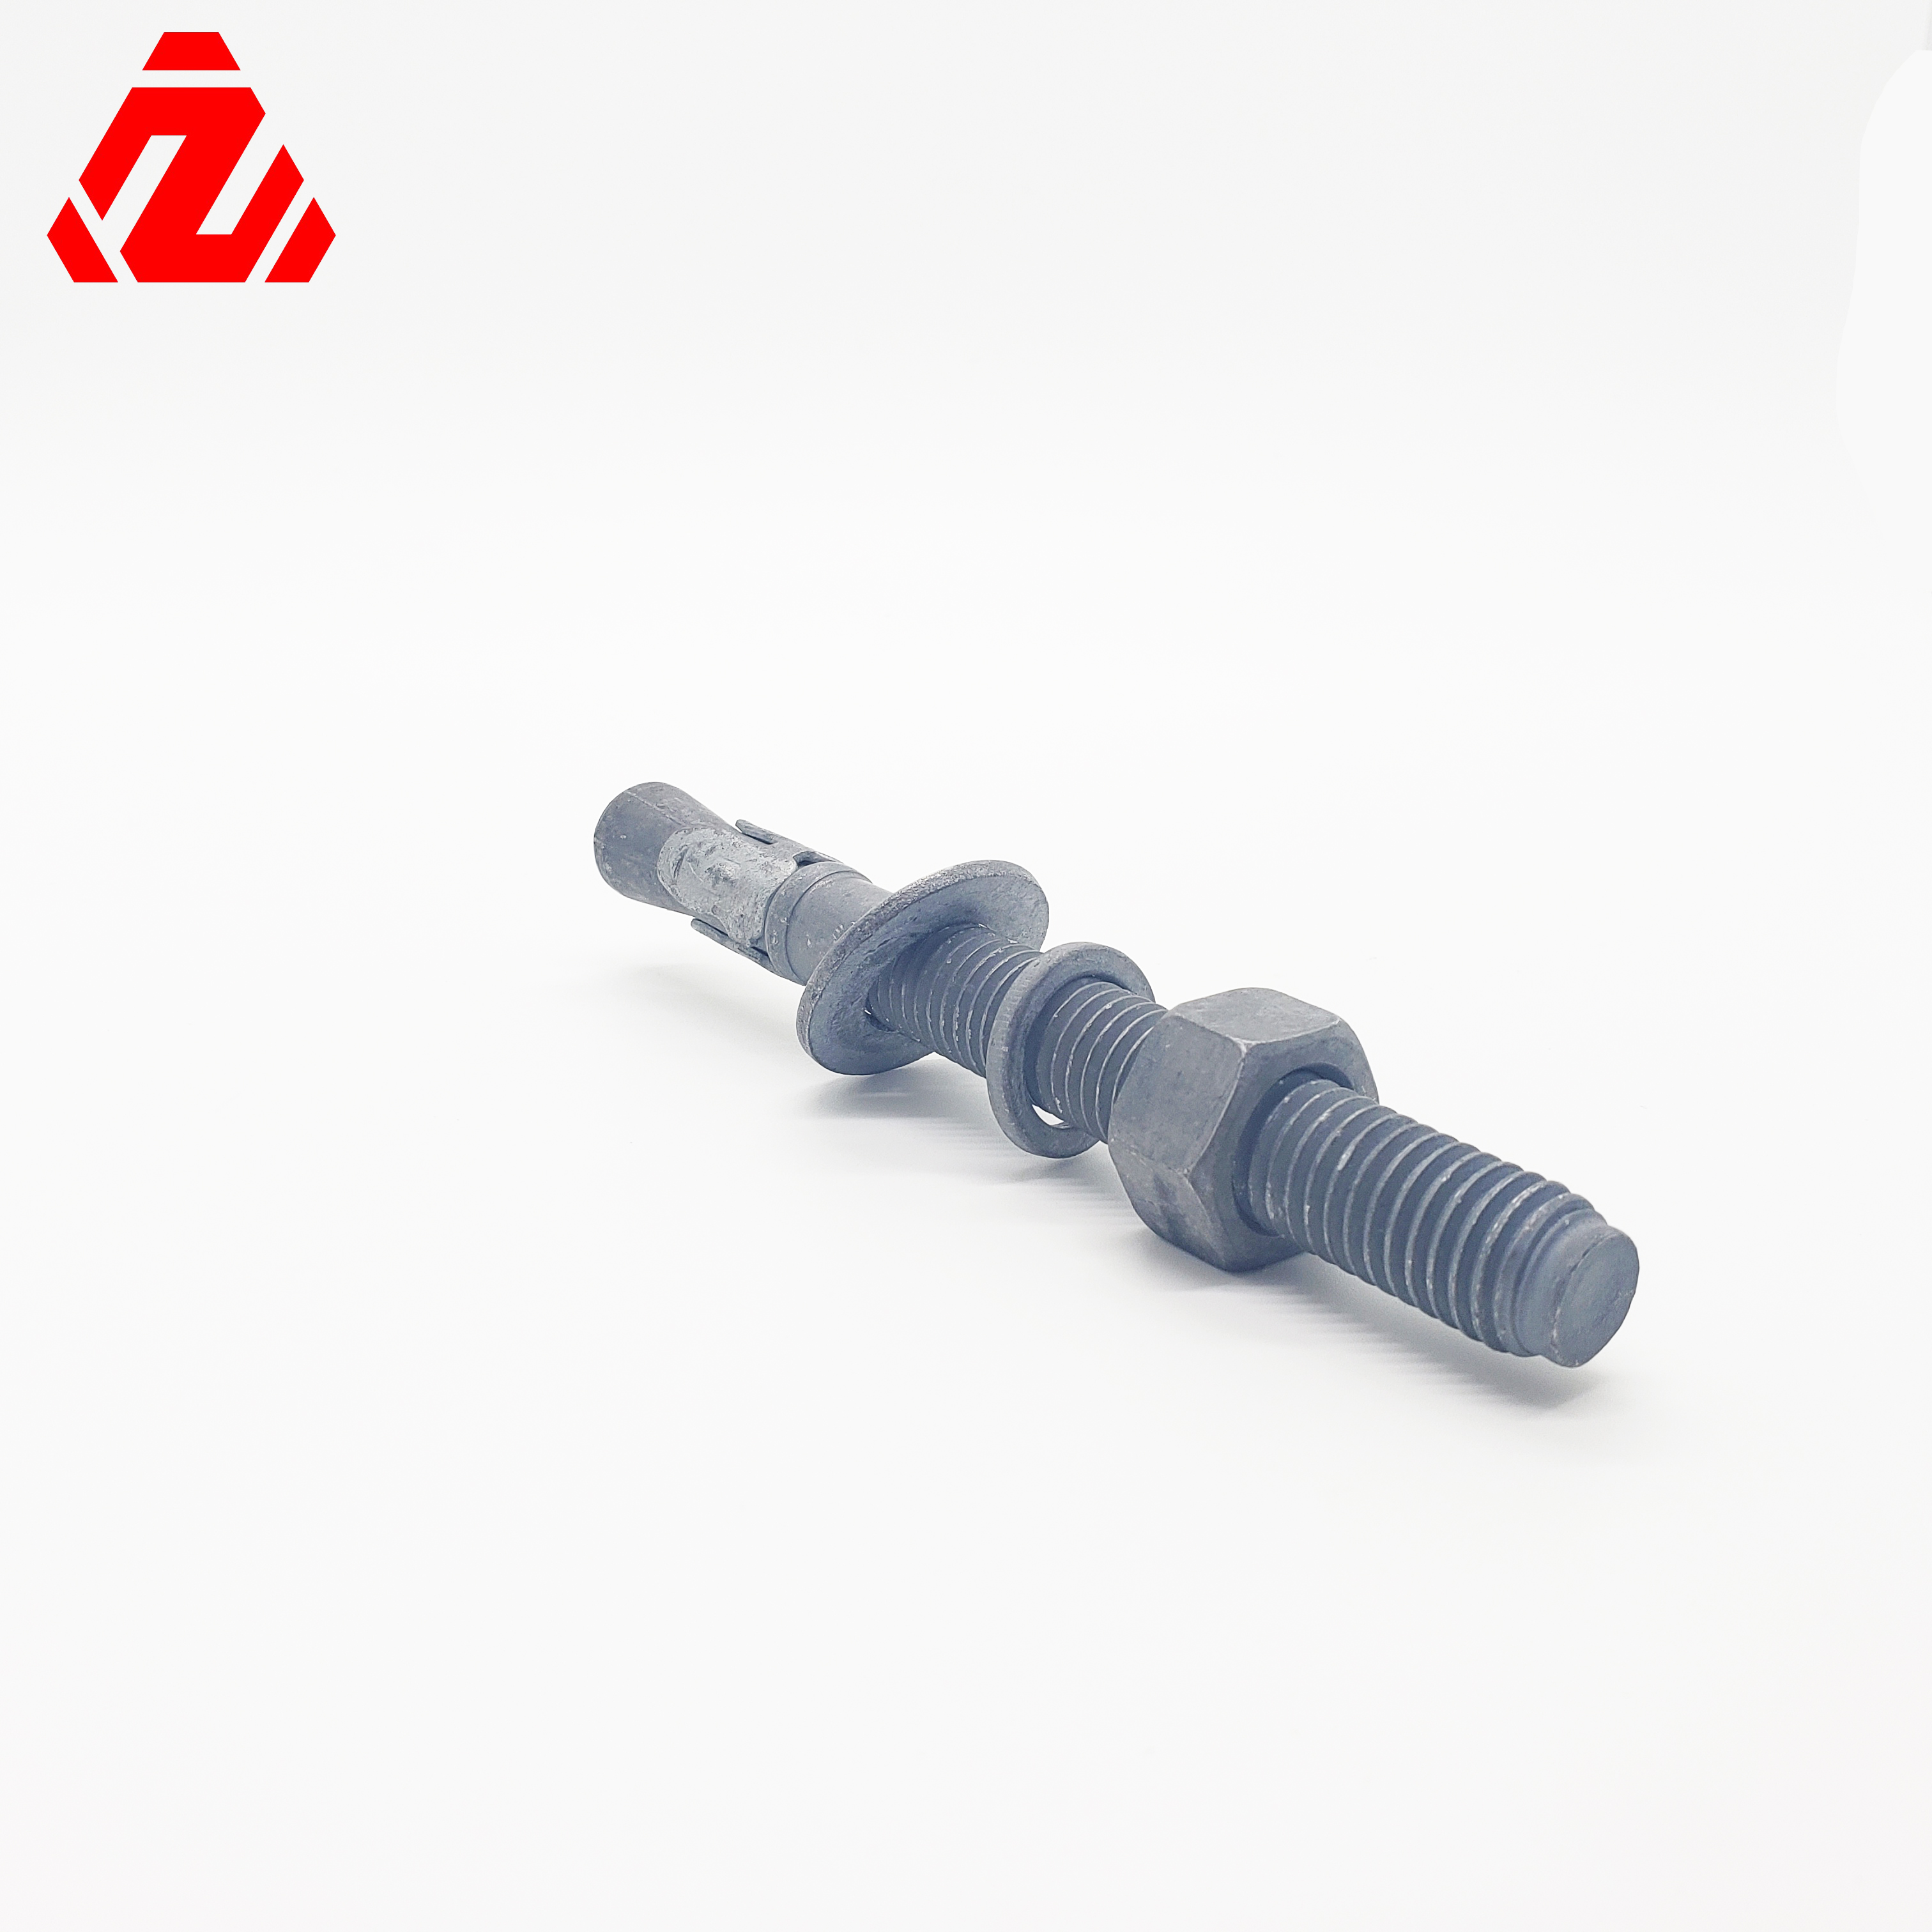 Introduction to combined screws